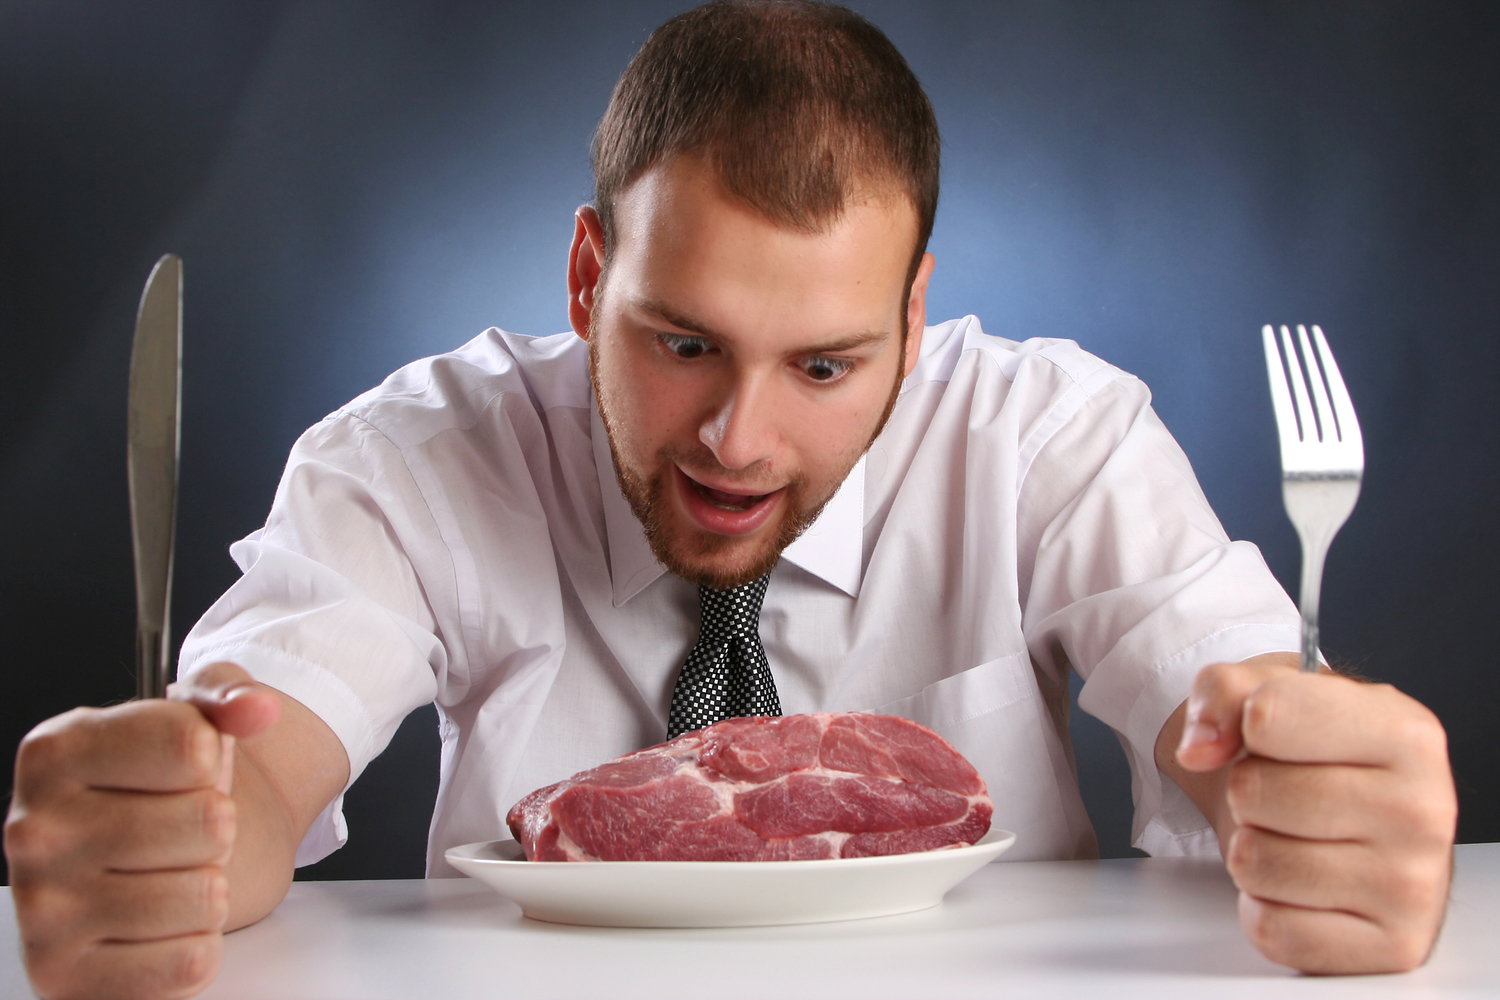 eccentric guy eating red meat